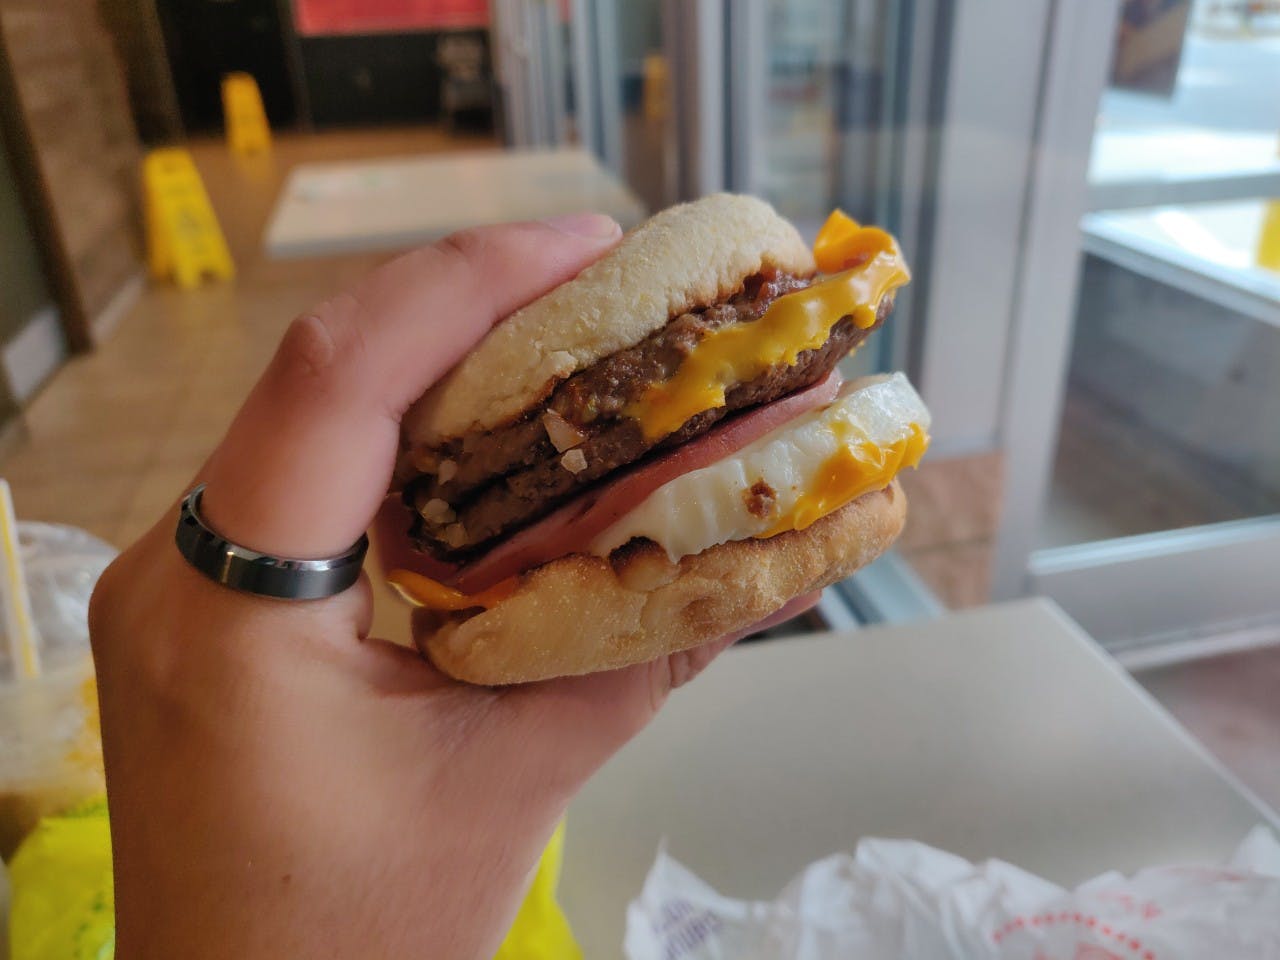 A person's hand holding up a McDonald's breakfast sandwich at a table inside McDonald's.